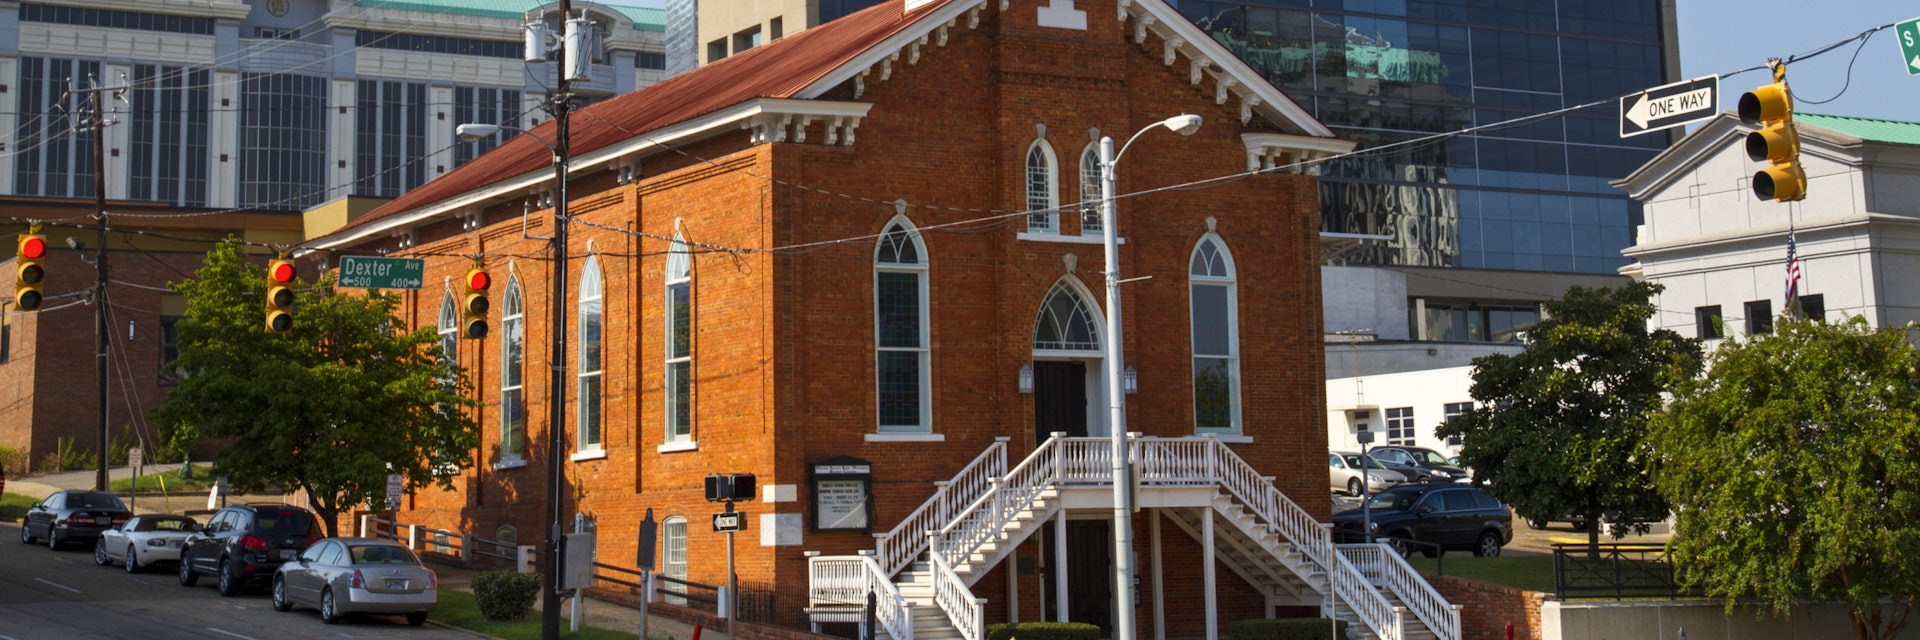 The Dexter avenue King Memorial Baptist church, where Martin Luther King Jr. worked, Montgomery, AL, USA